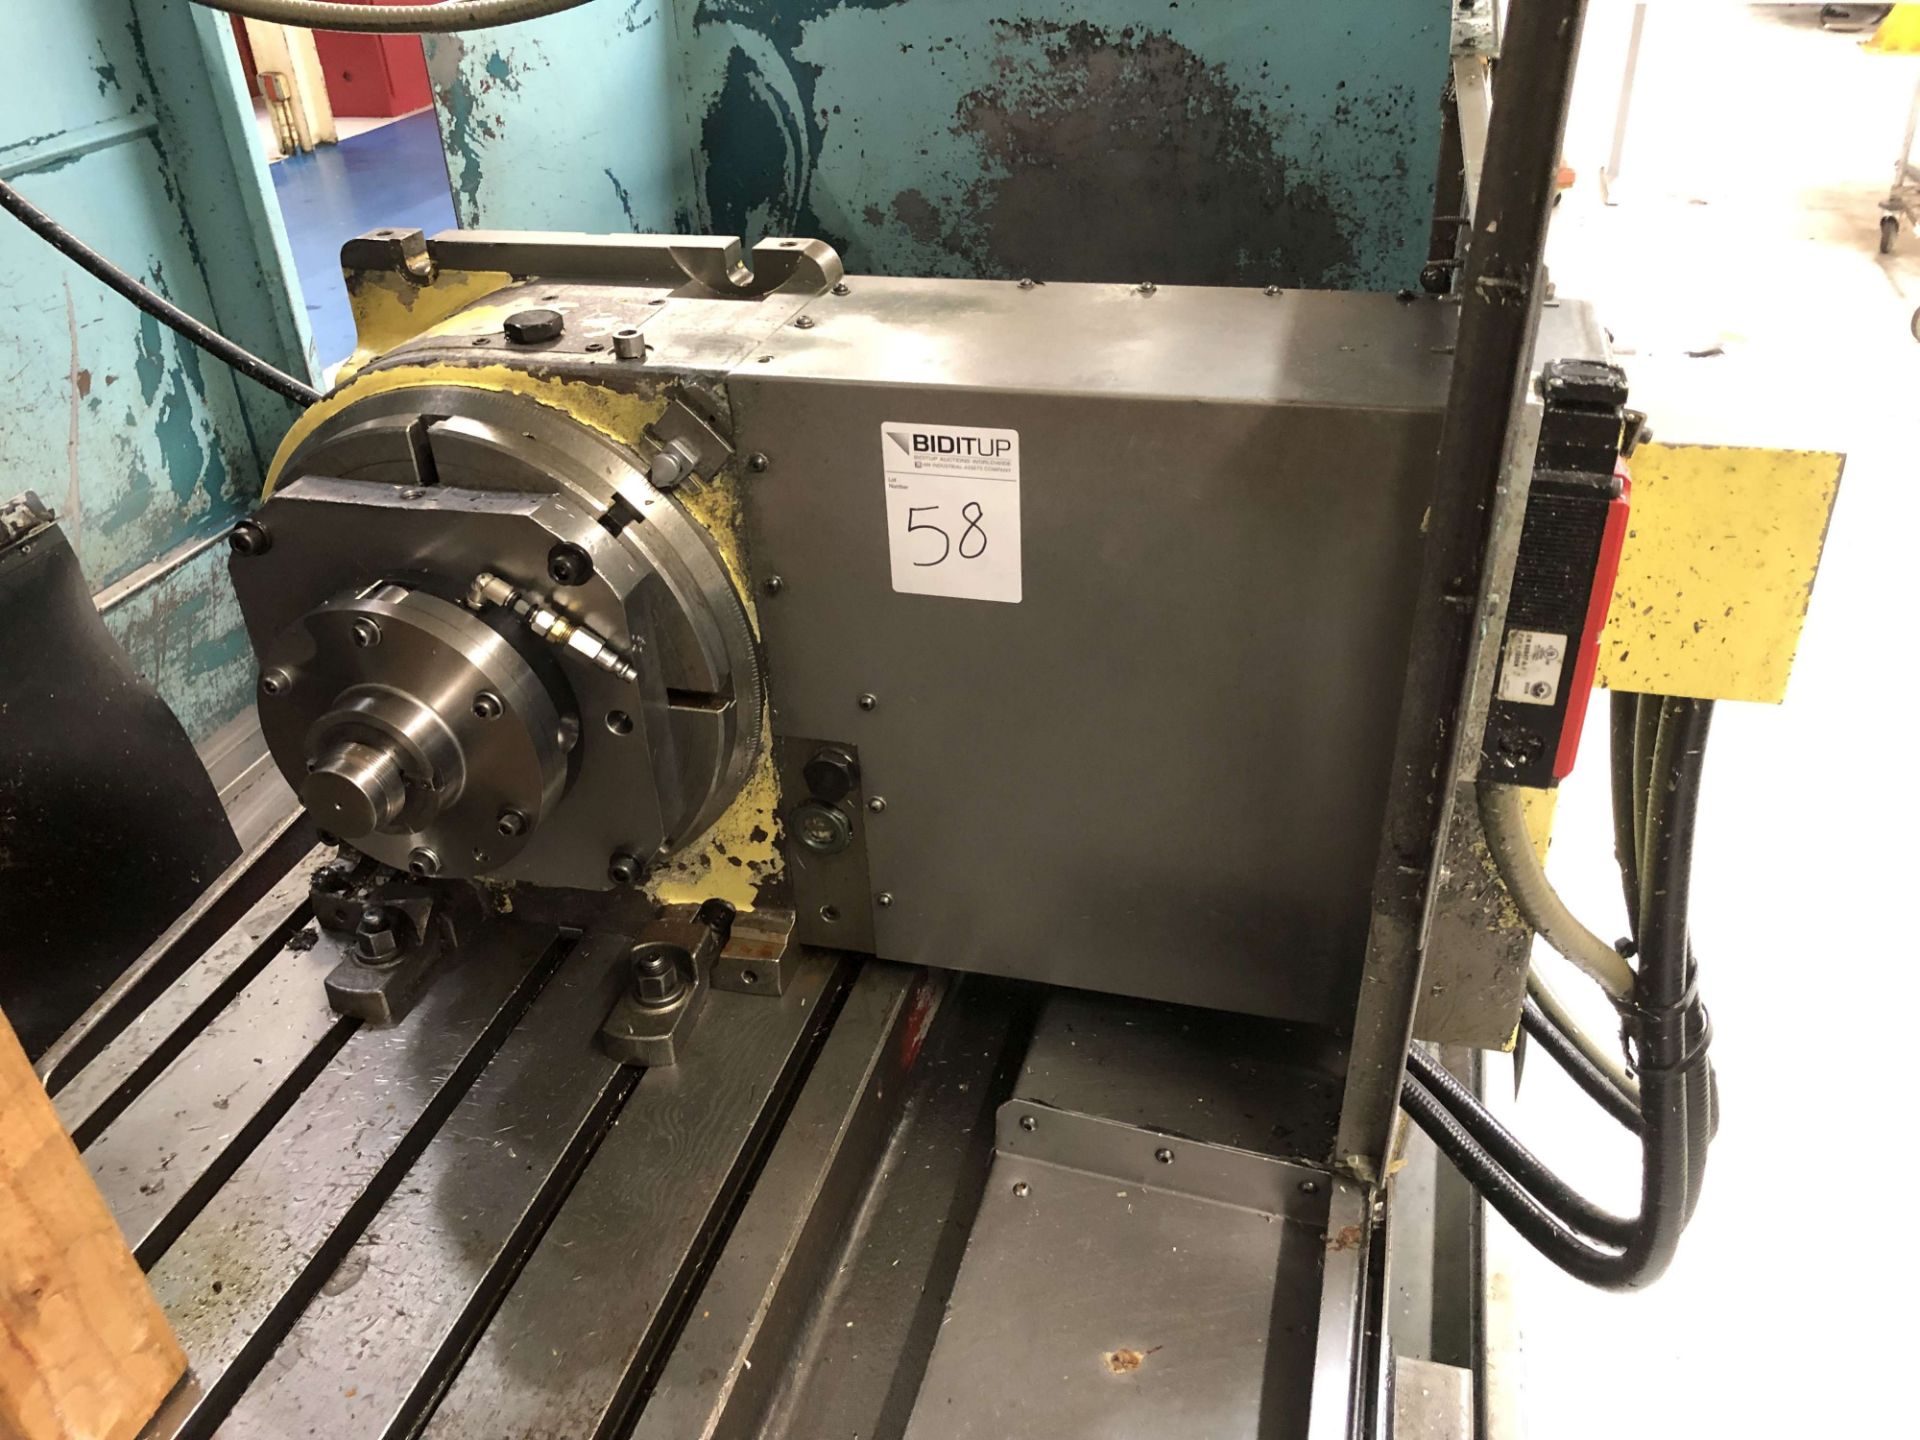 Nikken CNC321 Rotary Table [Located @ 1700 Business Center Drive, Duarte, CA 91010]